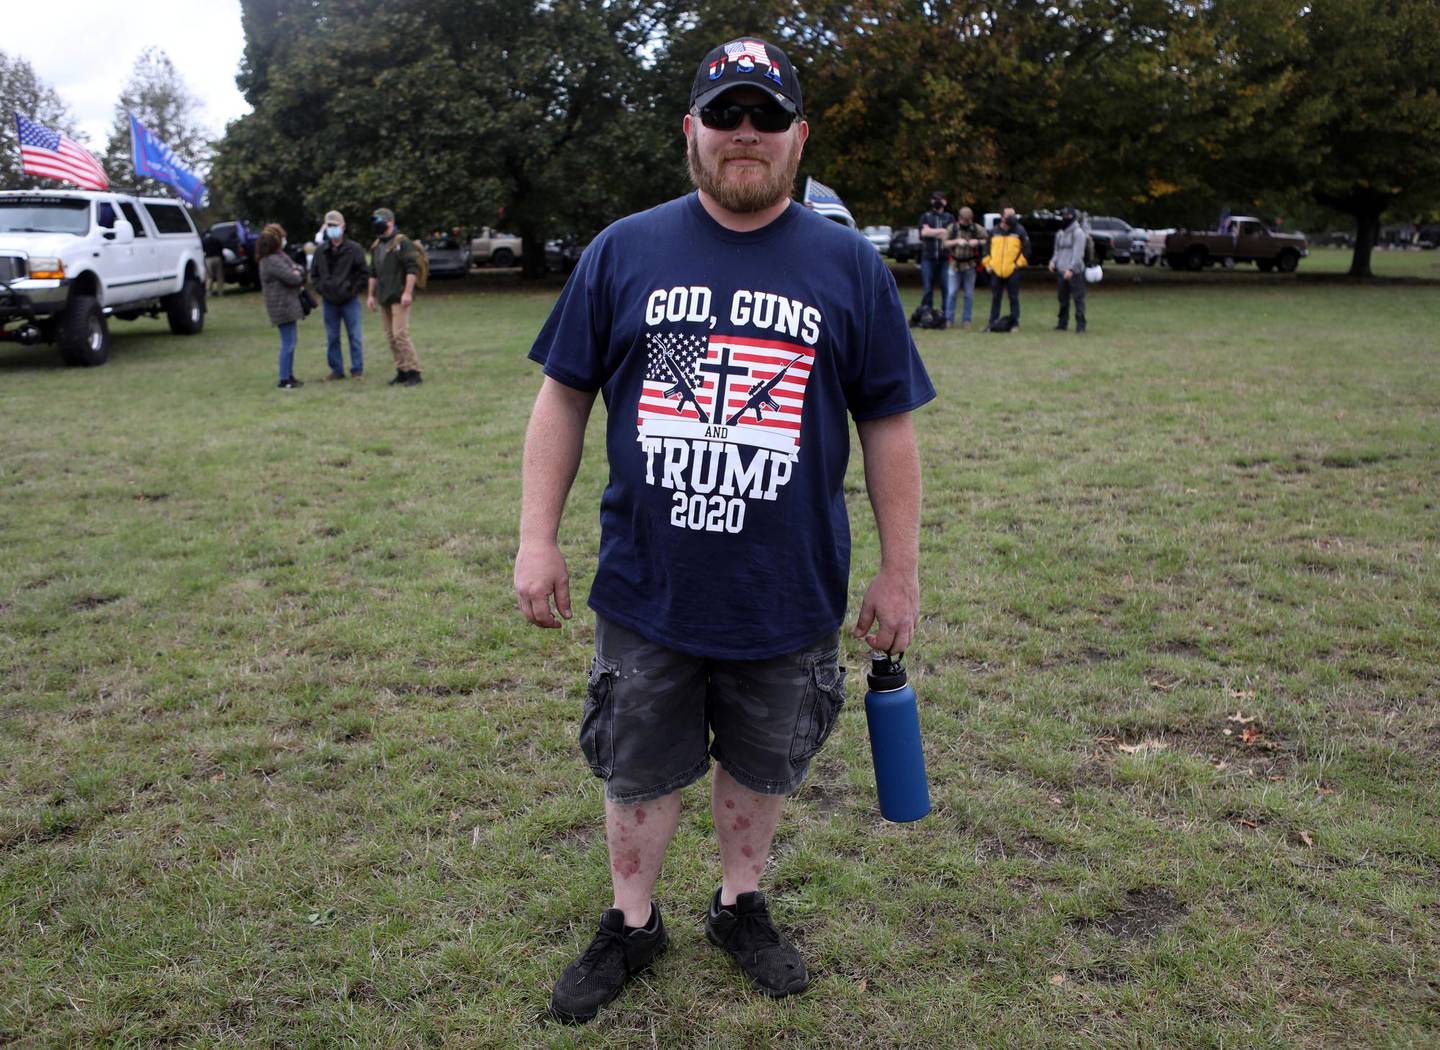 A supporter of the far-right group Proud Boys attends a rally in Portland, Oregon, U.S. September 26, 2020. REUTERS/Jim Urquhart